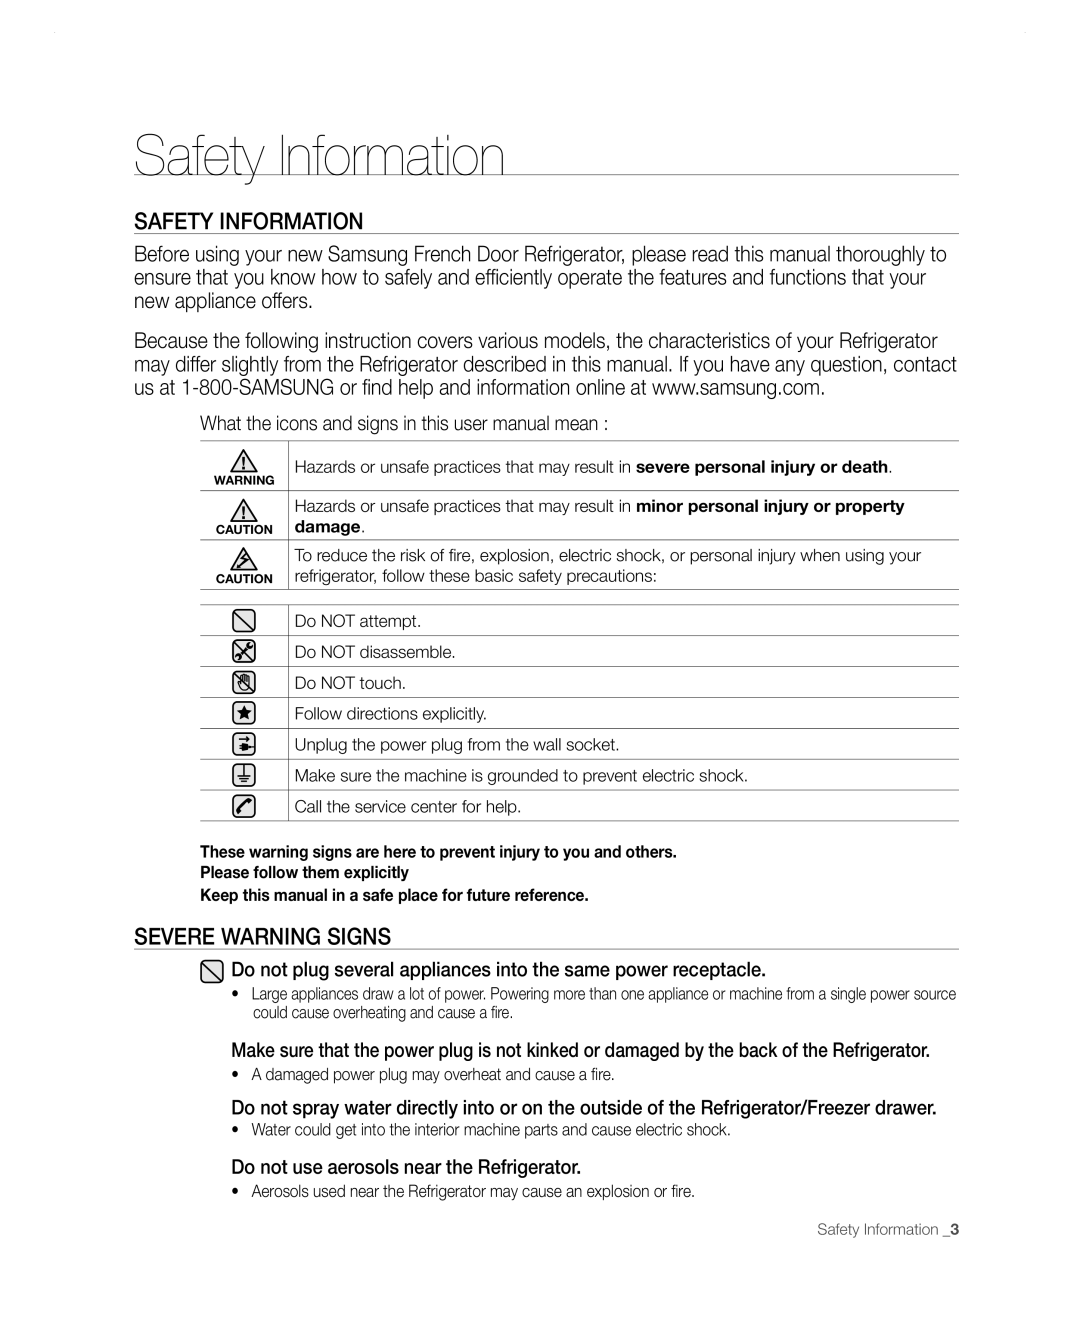 Samsung RF267AA Safety Information, Severe Warning Signs, Do not plug several appliances into the same power receptacle 